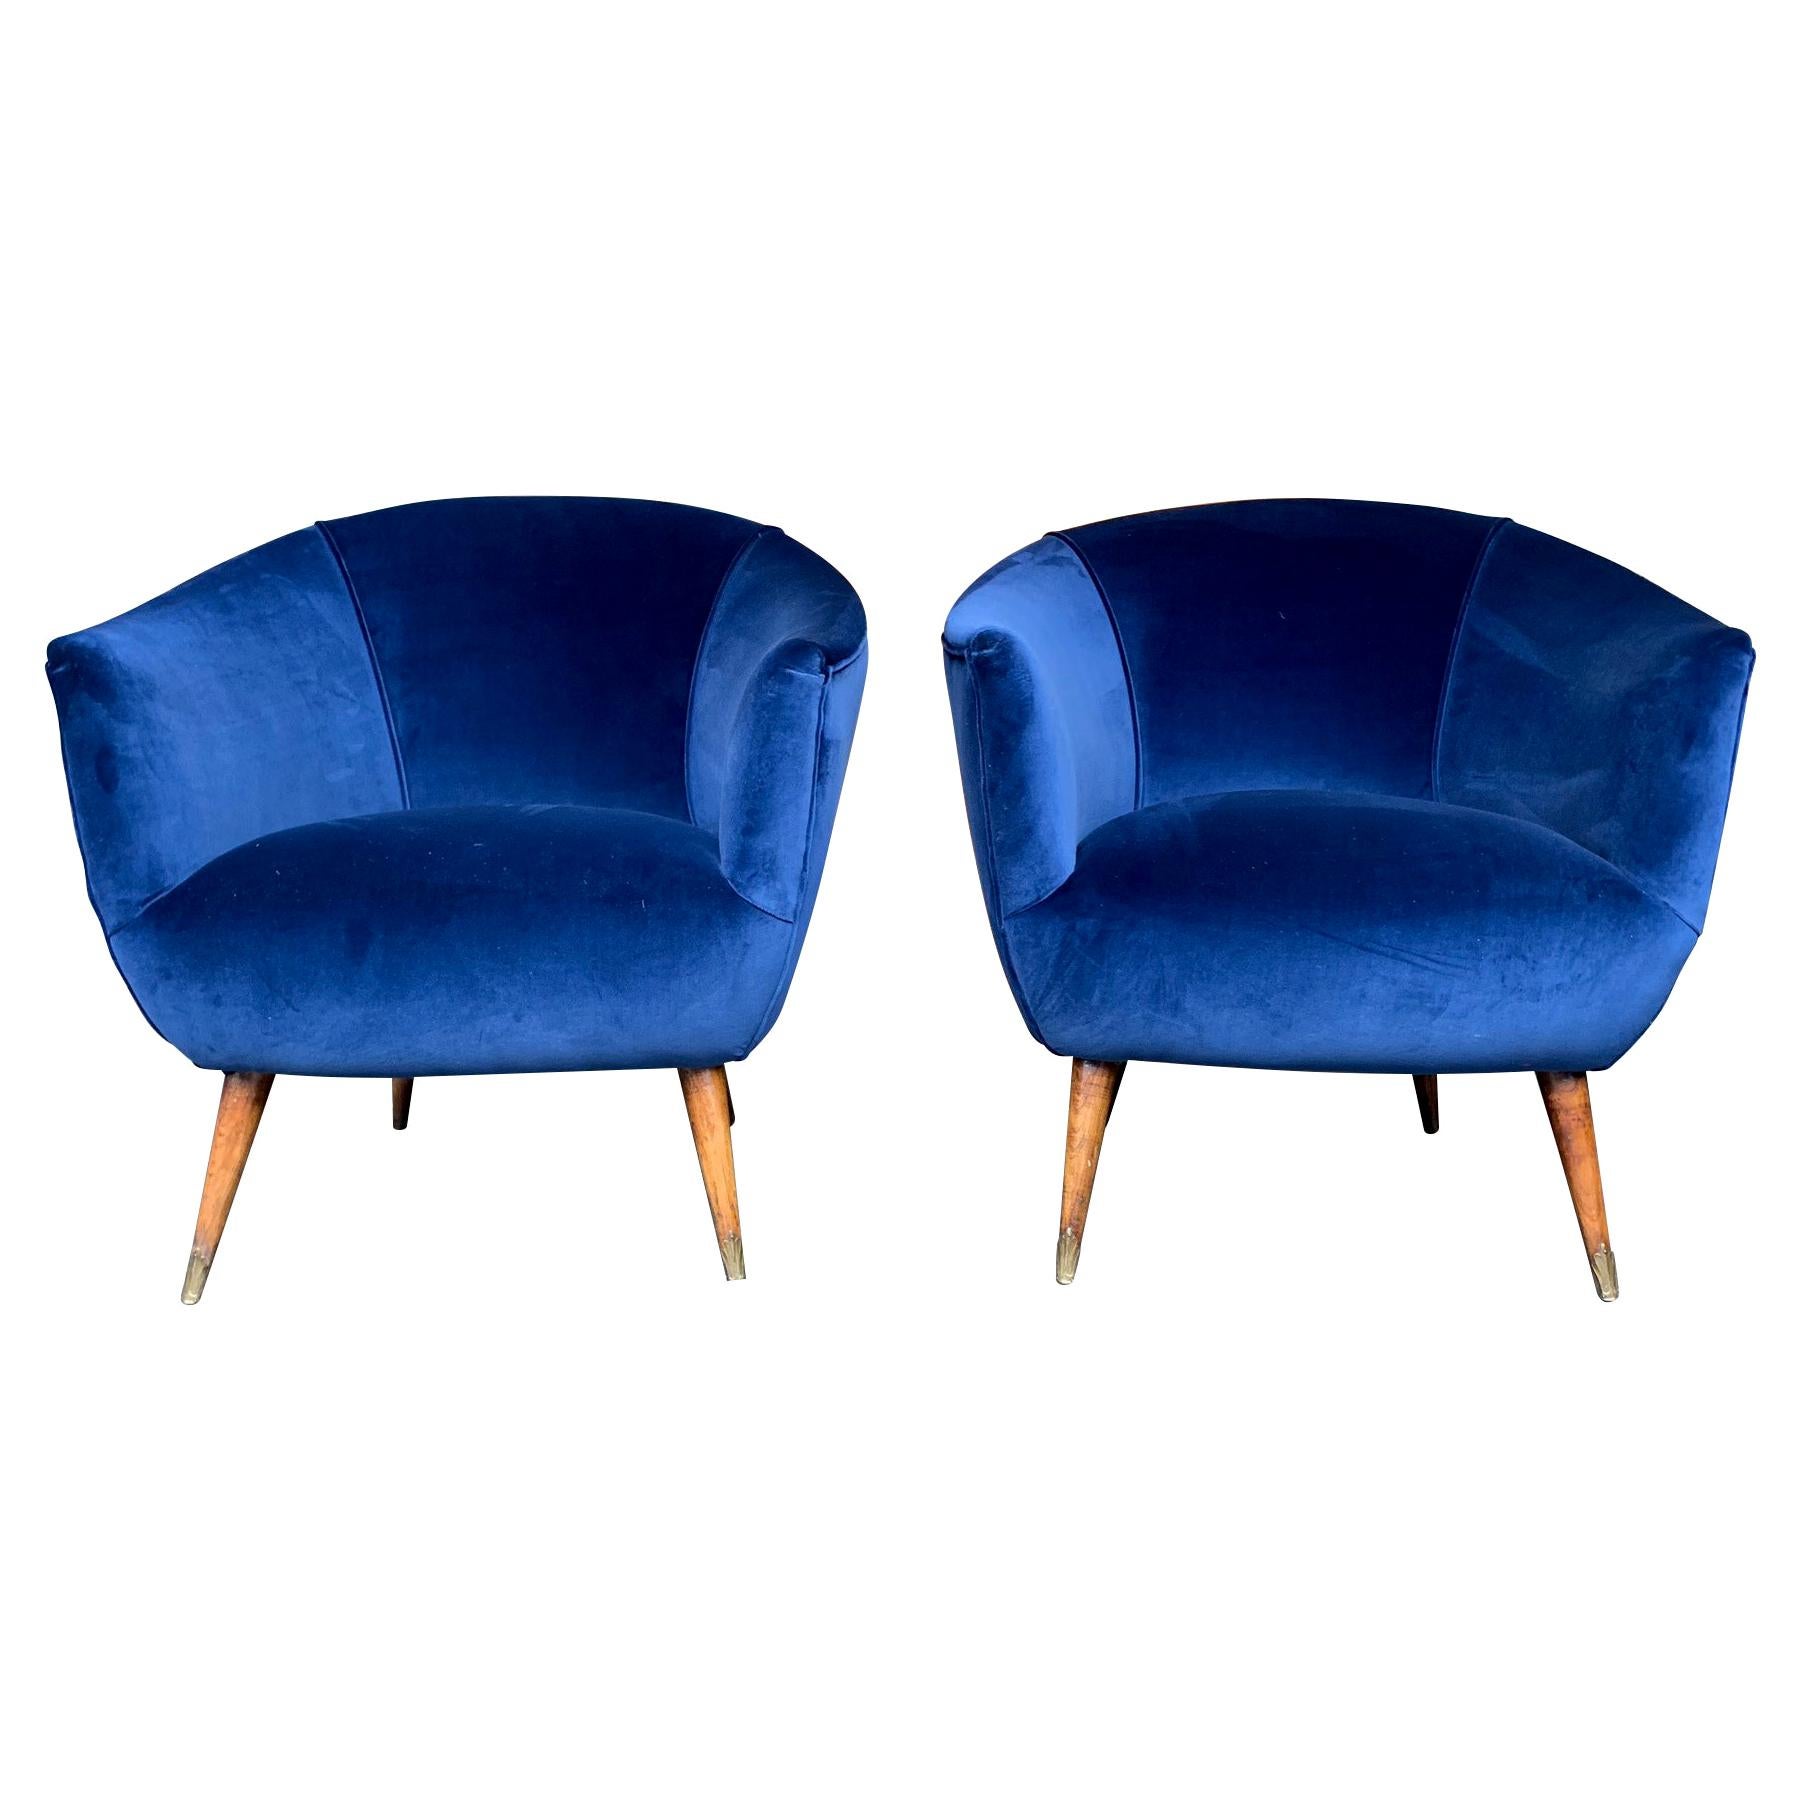 Lovely Pair of Italian 1950s Cocktail Chairs in the Style of Gio Ponti